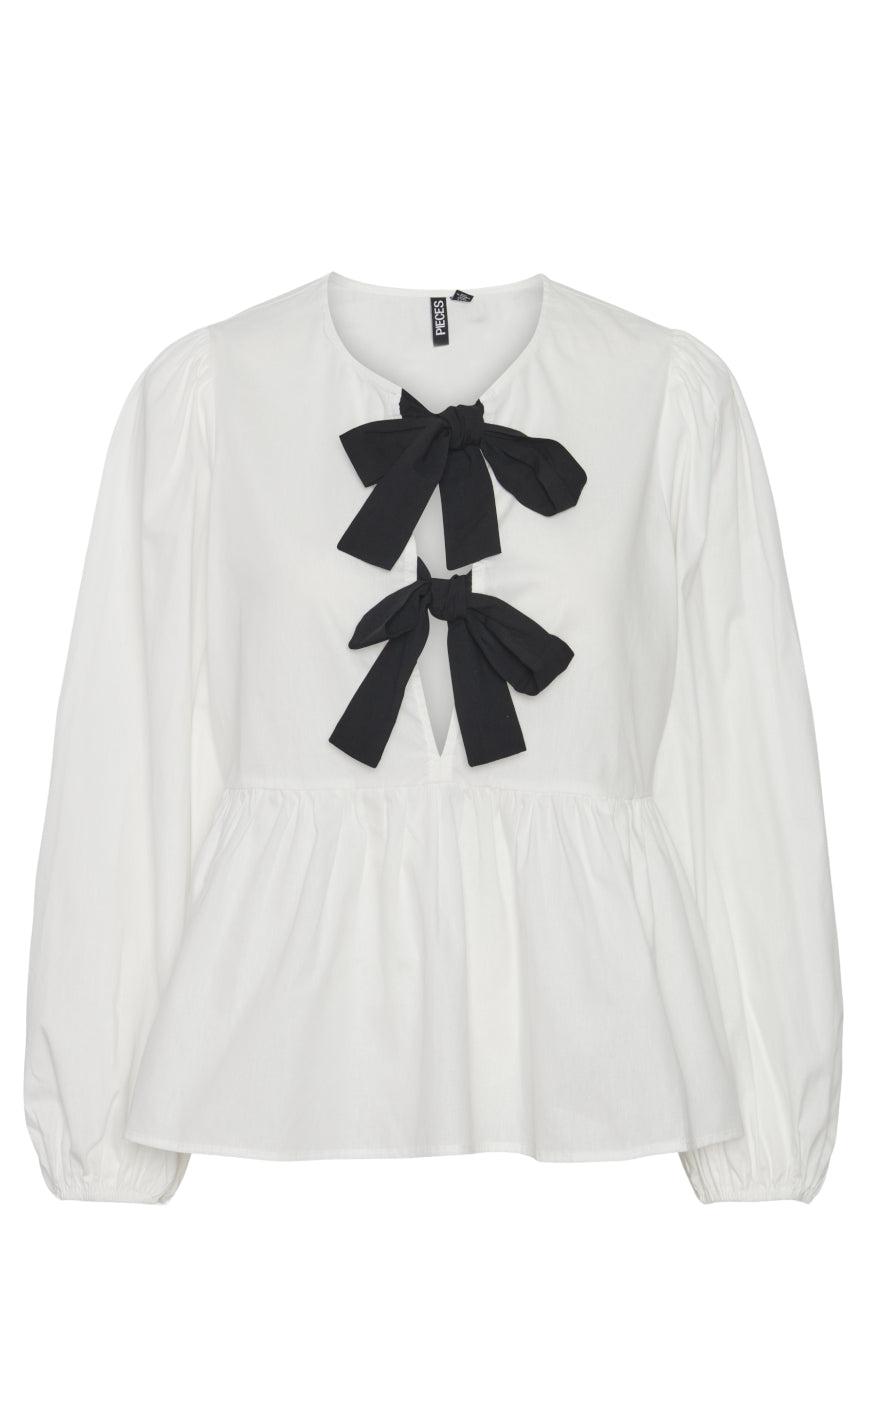 Billede af PIECES Bluse - Golly Bow - Bright White Black Bows